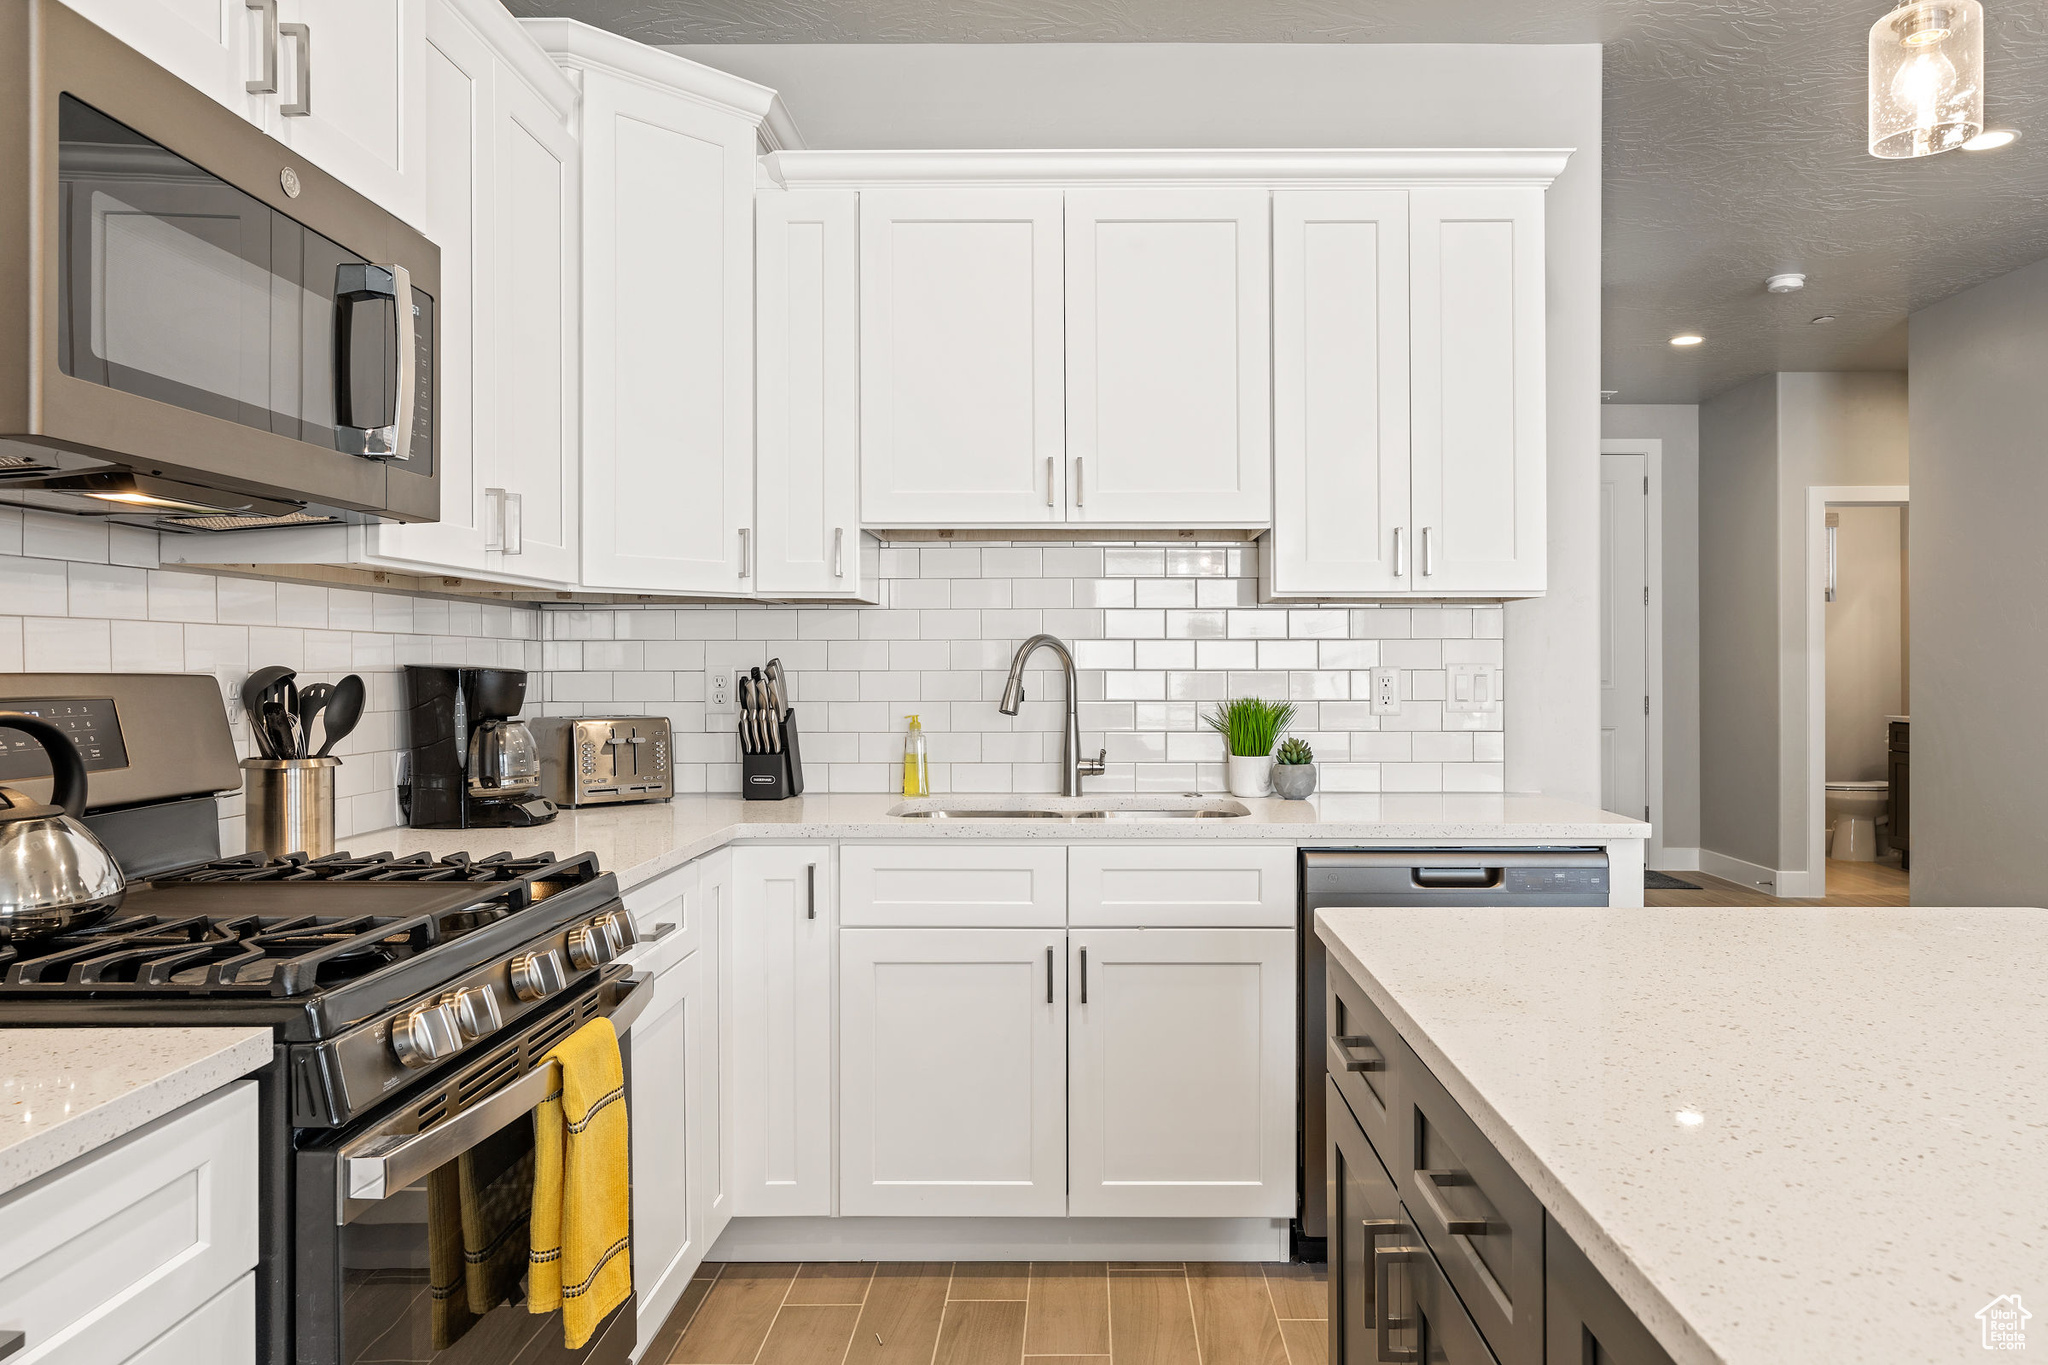 Kitchen with white cabinets, light hardwood / wood-style flooring, backsplash, appliances with stainless steel finishes, and sink